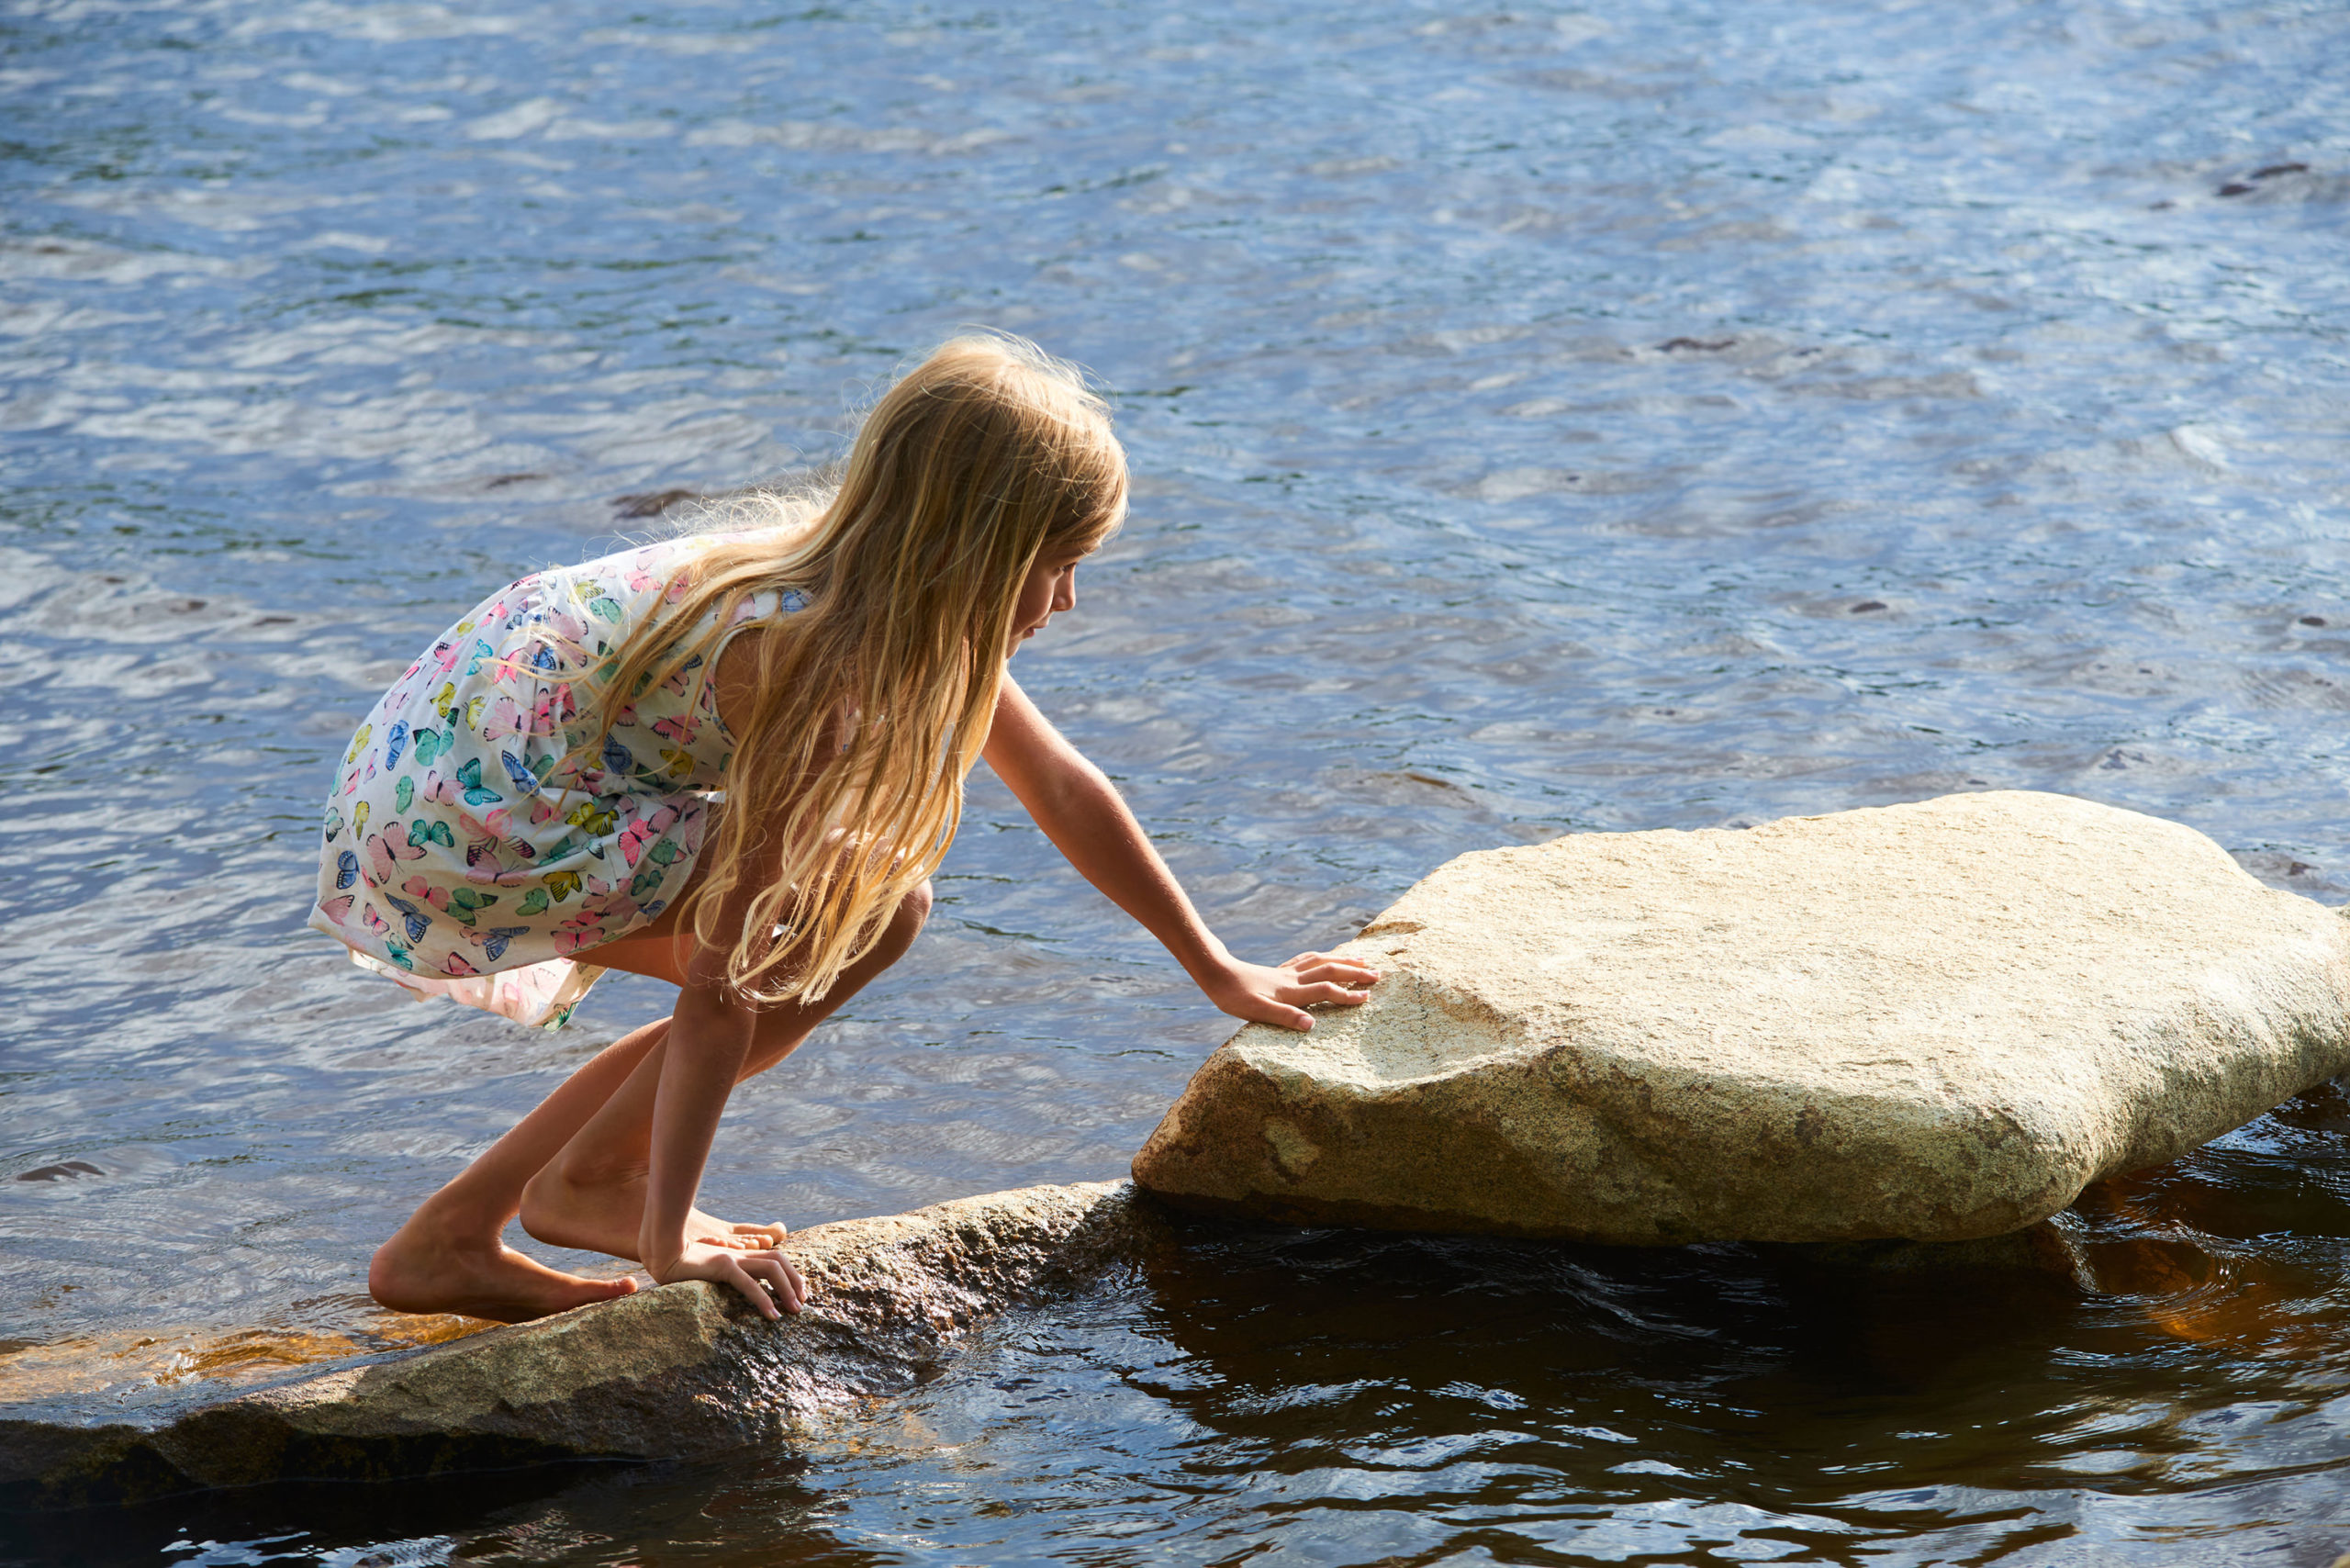 Young girl playing on the rocks in the water.